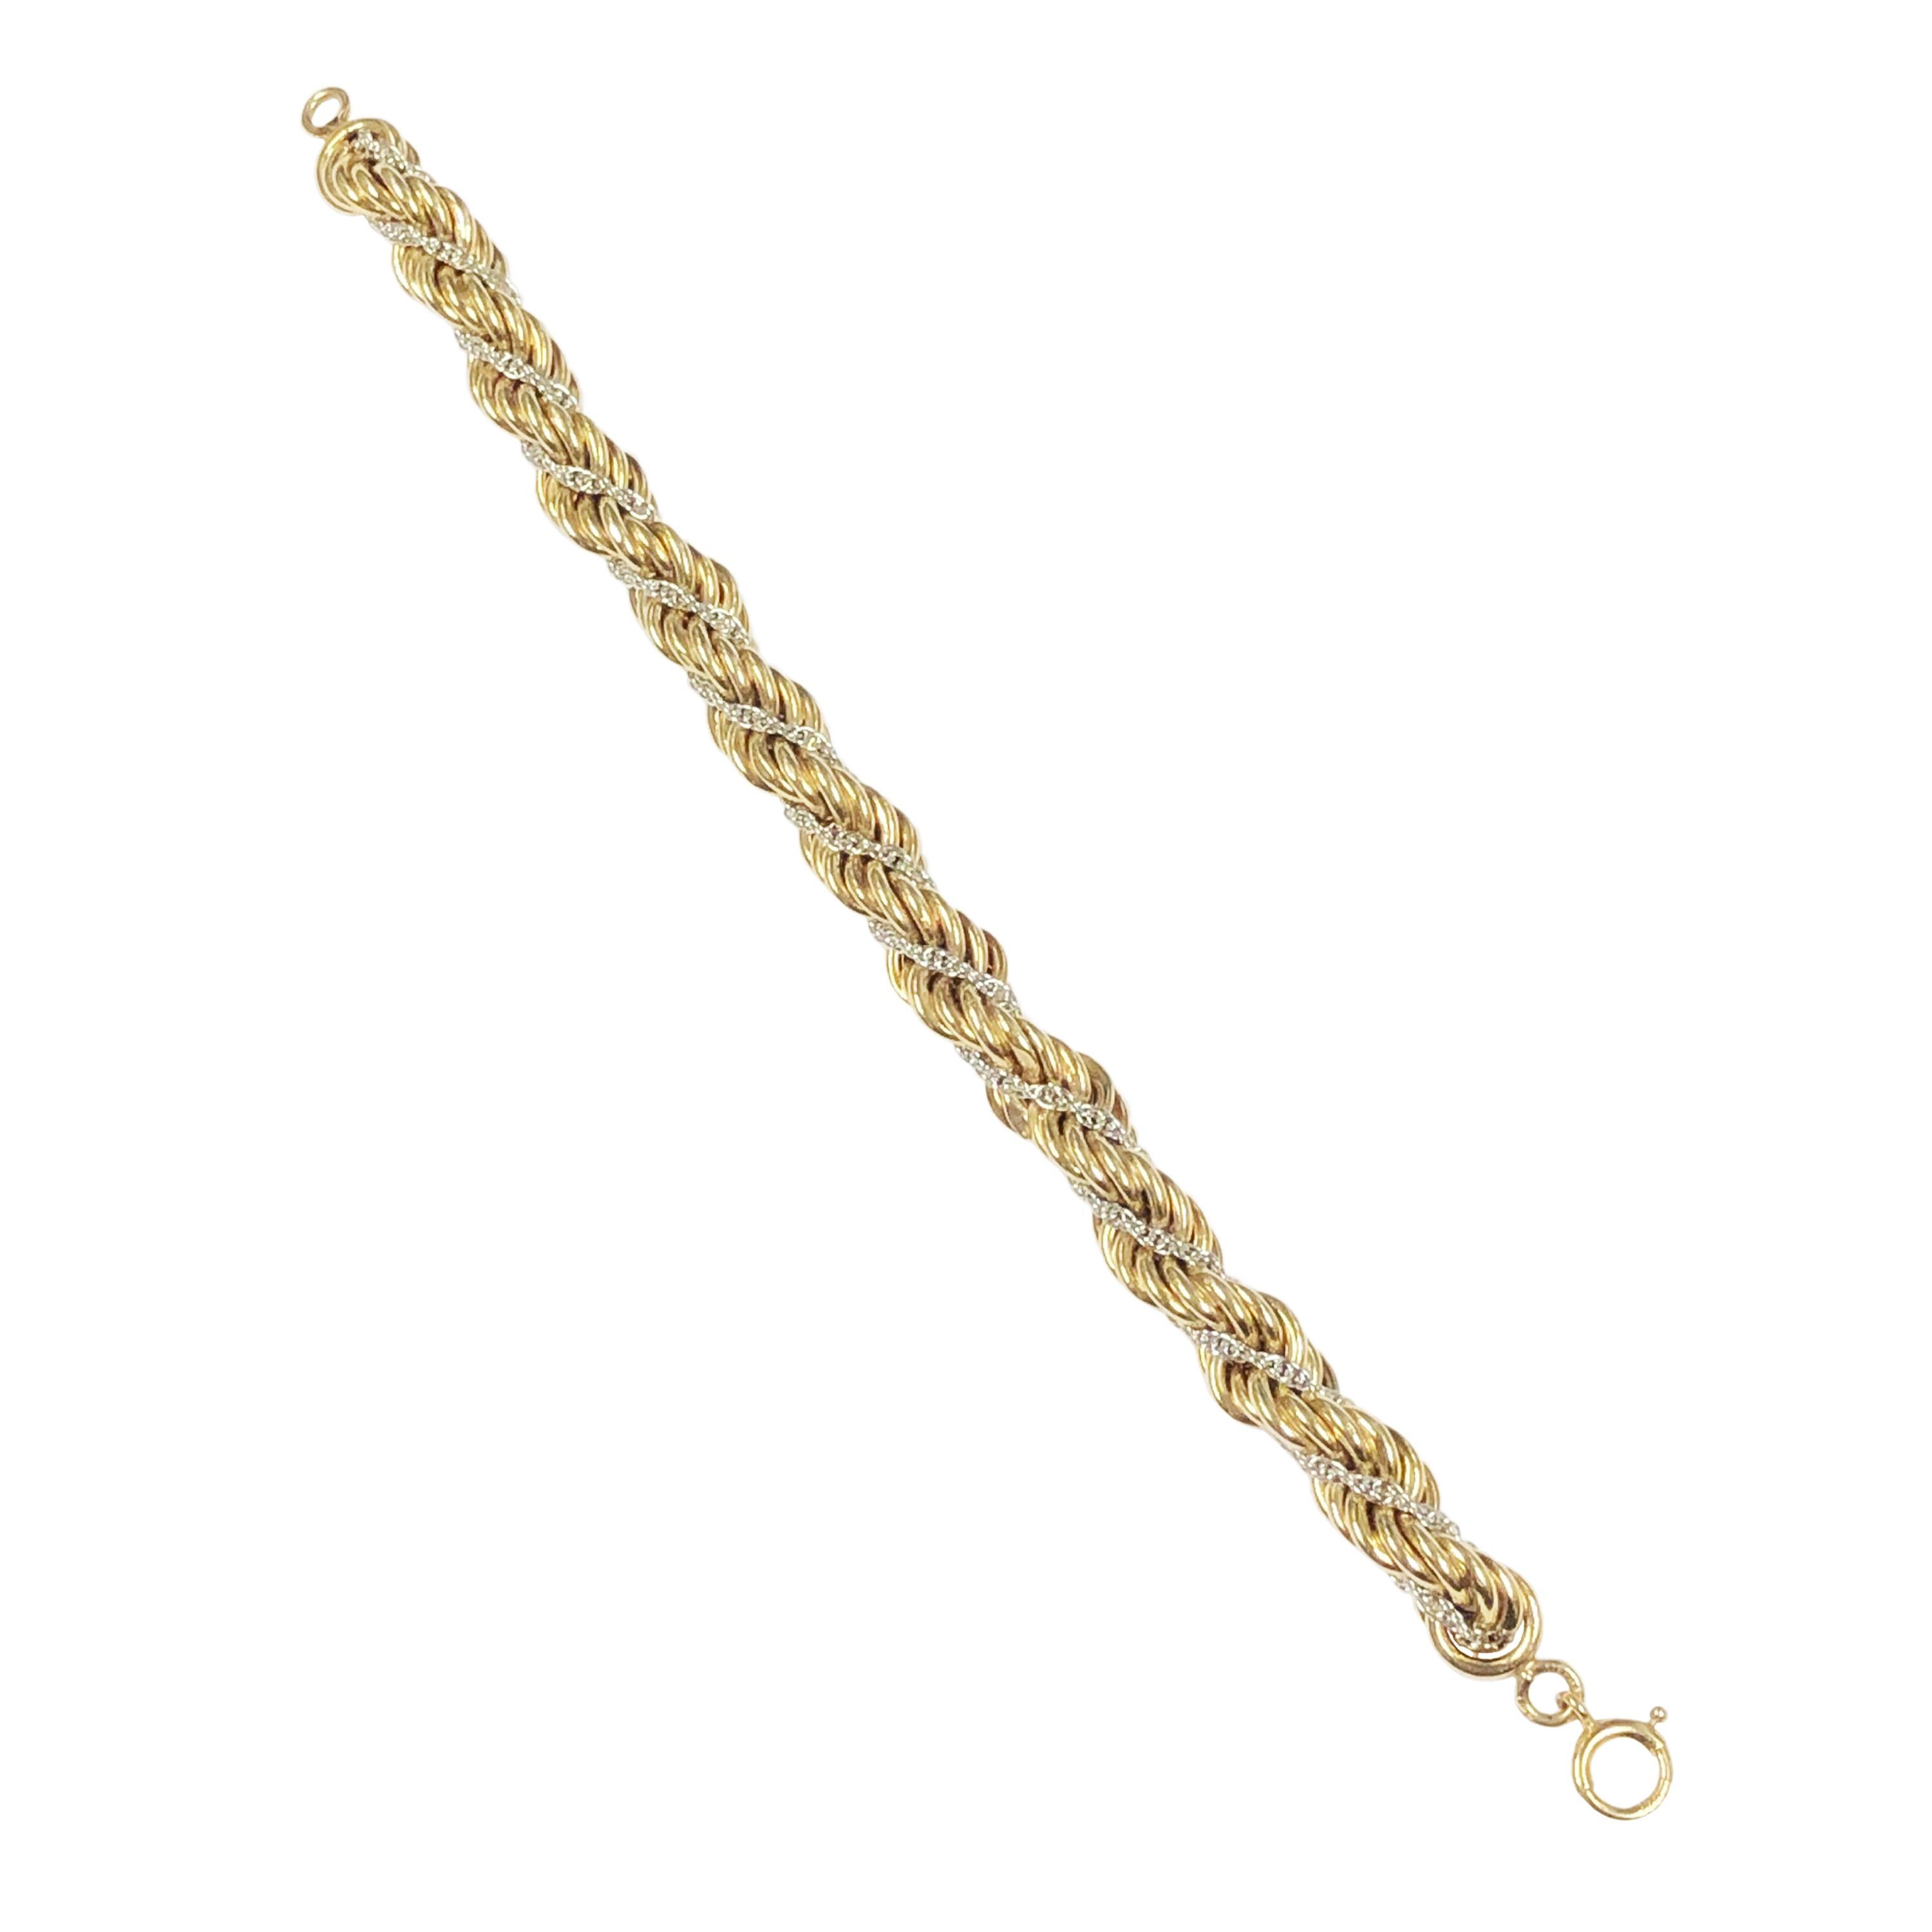 Tiffany & Co. White and Yellow Gold Large Woven Rope Bracelet